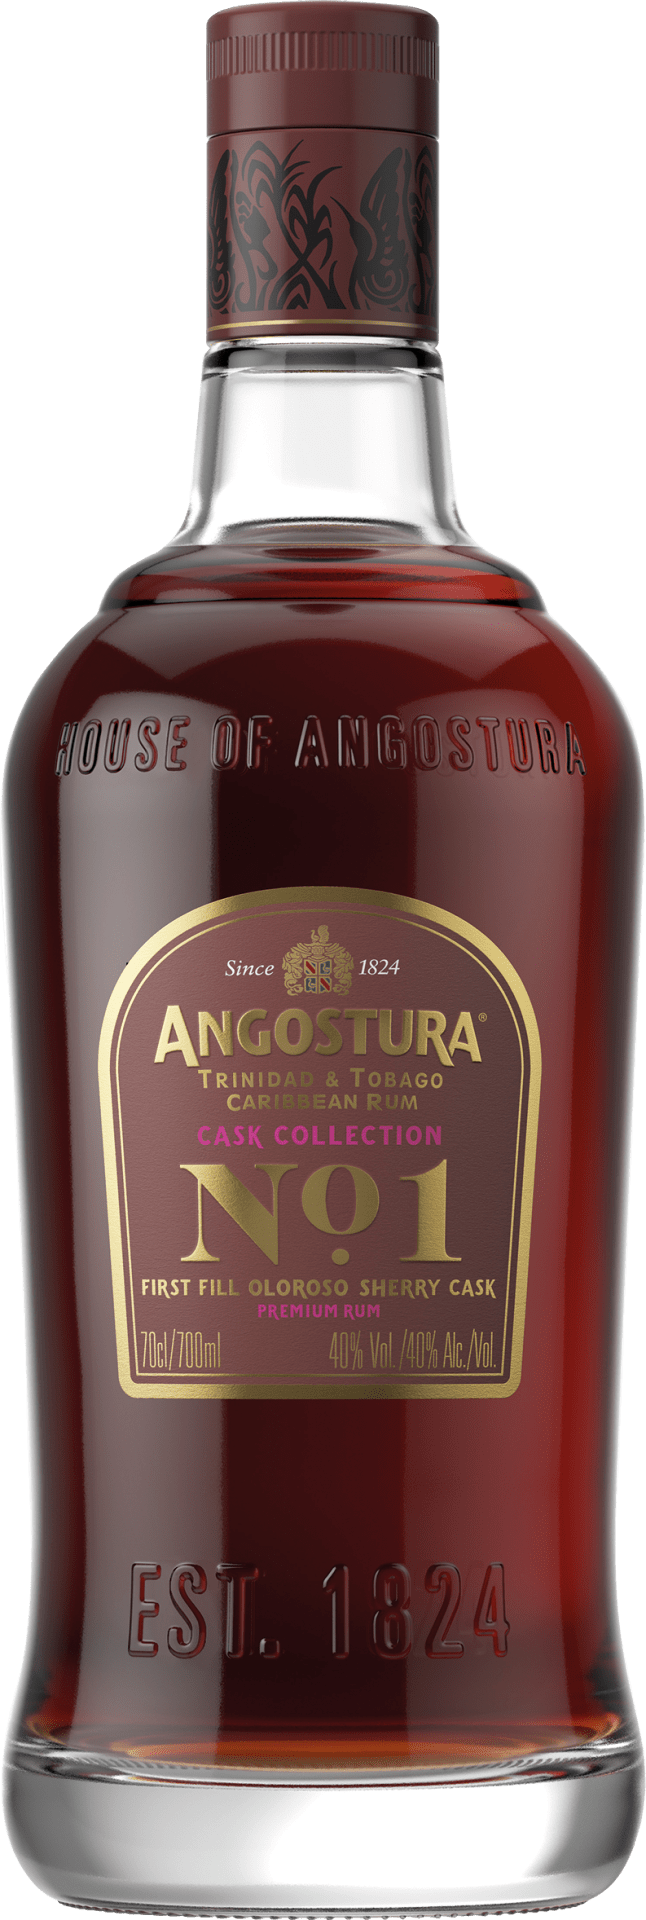 Angostura Cask No.1, Ed. 3 Oloroso Cask First Filled Olorso Sherry